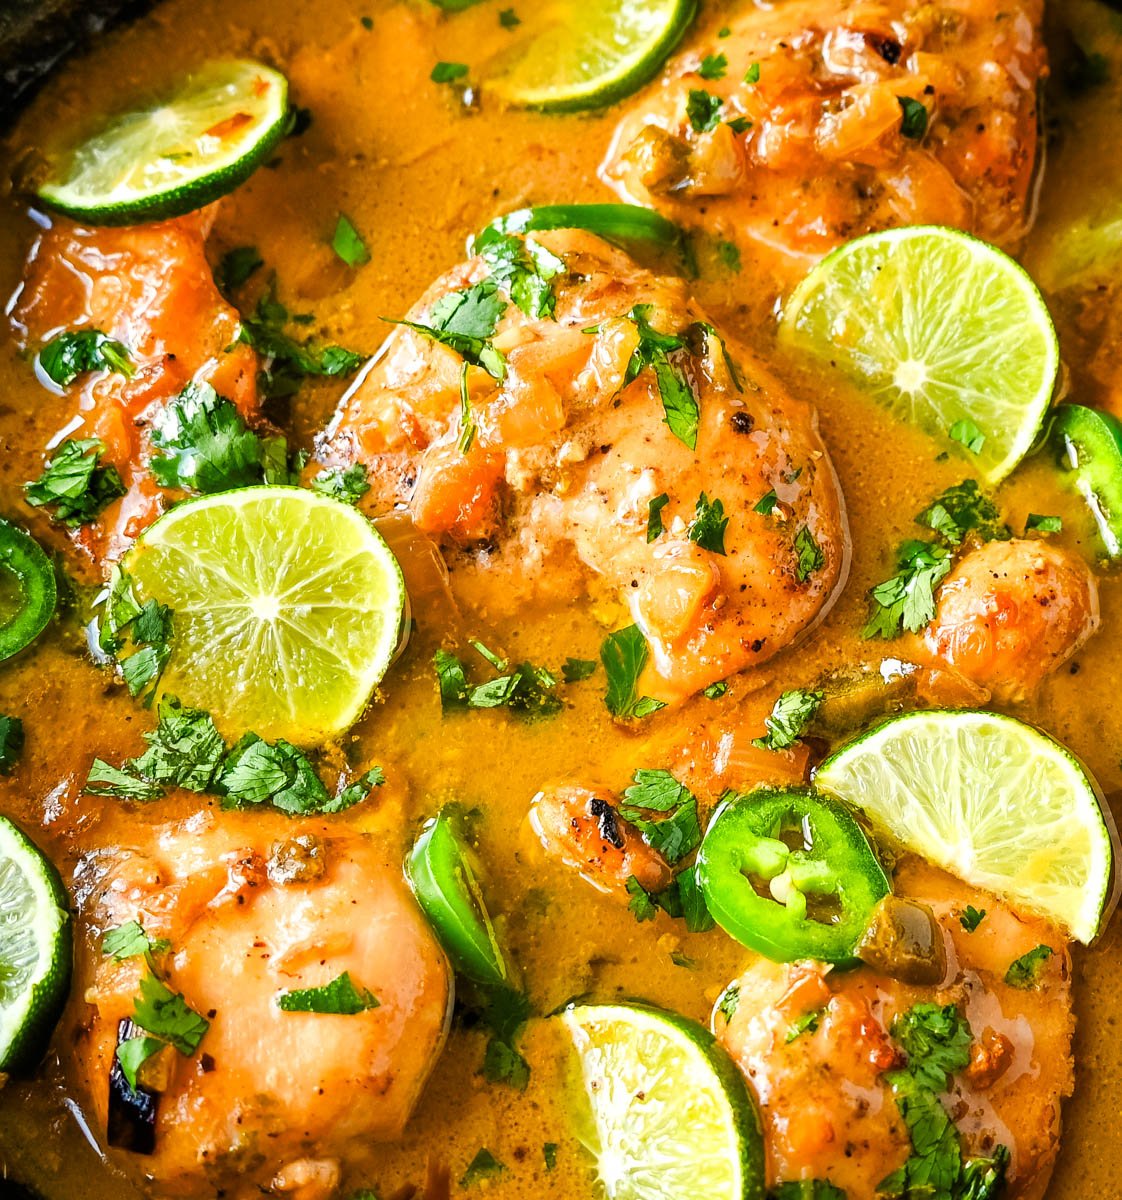 This Skillet Coconut Lime Chicken is made with a homemade coconut lime sauce crafted from creamy canned coconut milk, zesty fresh lime juice, and a touch of garlic and ginger and has the perfect sweet, savory, and tangy flavors. It is paired with tender, juicy chicken breasts for a quick, easy, and flavorful one-skillet dinner.